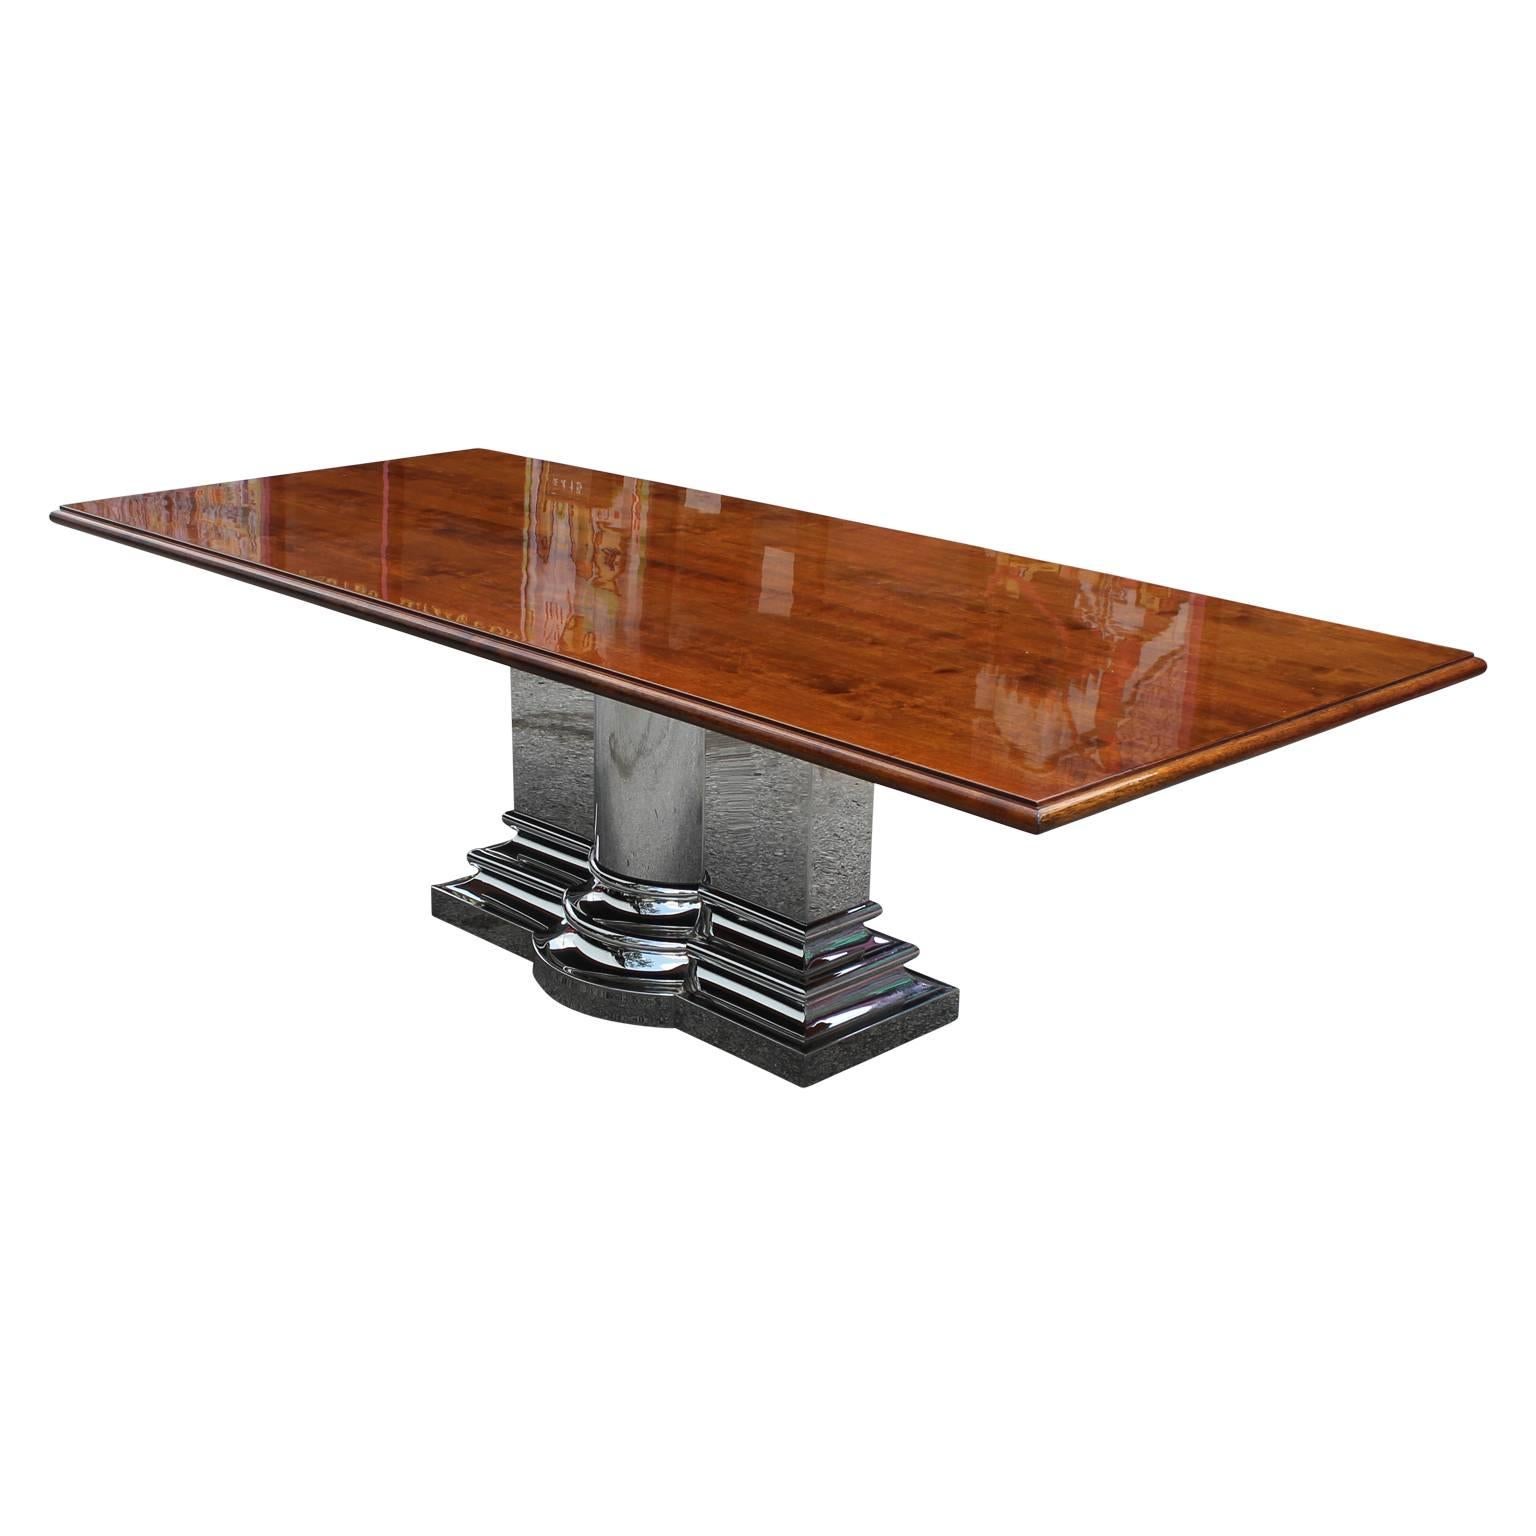 Large monumental walnut dining or conference table with a unique and elegant stainless steel base base designed by Stanley Jay Friedman for Brueton. Superb quality. The table can accommodate a larger heavier top as well.

